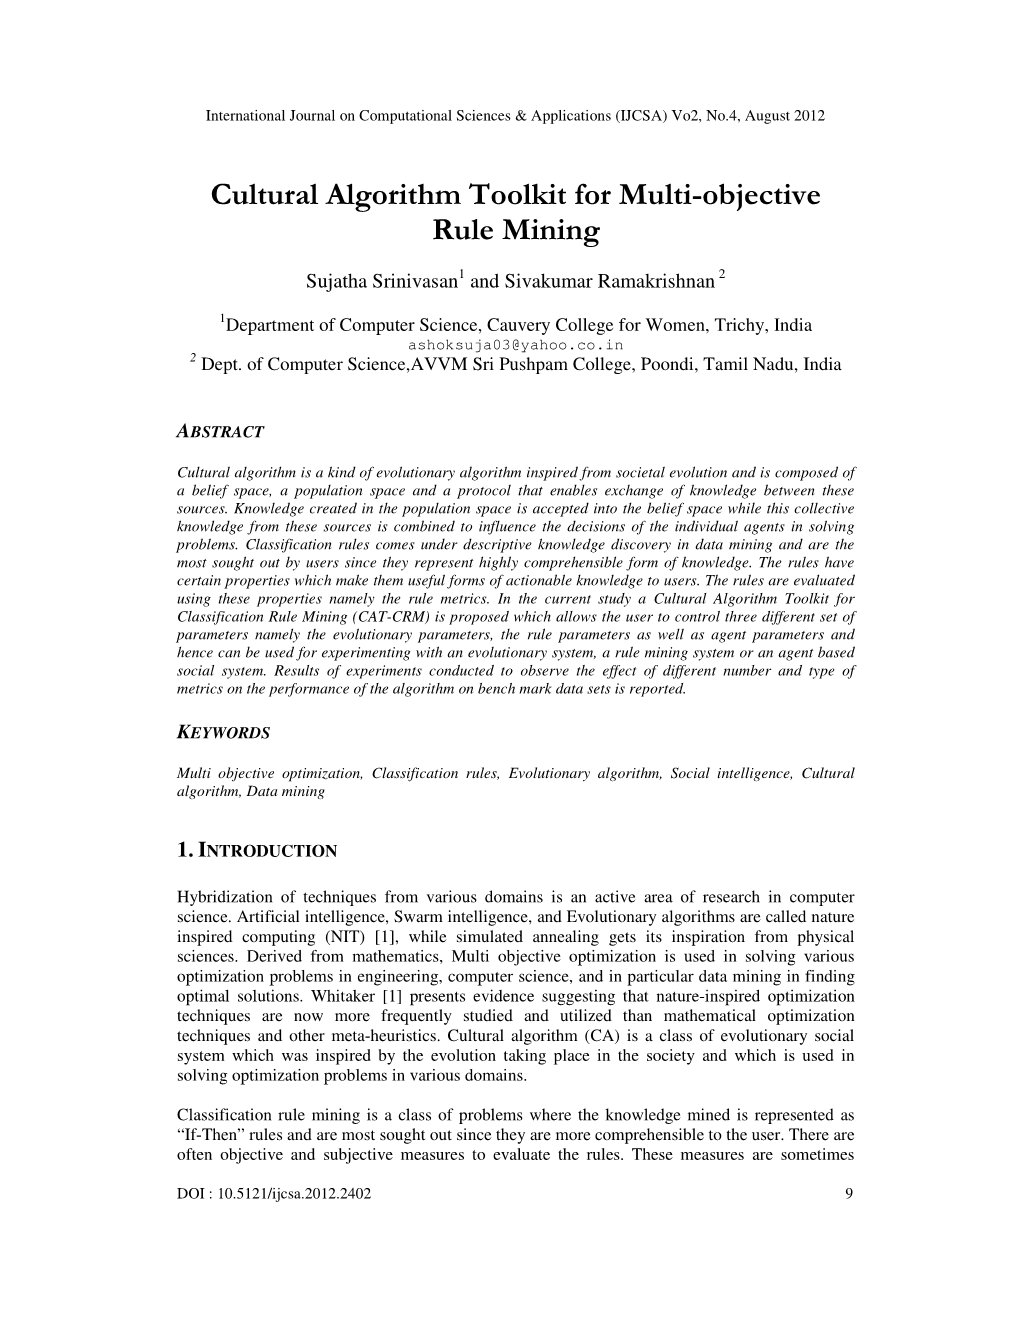 Cultural Algorithm Toolkit for Multi-Objective Rule Mining